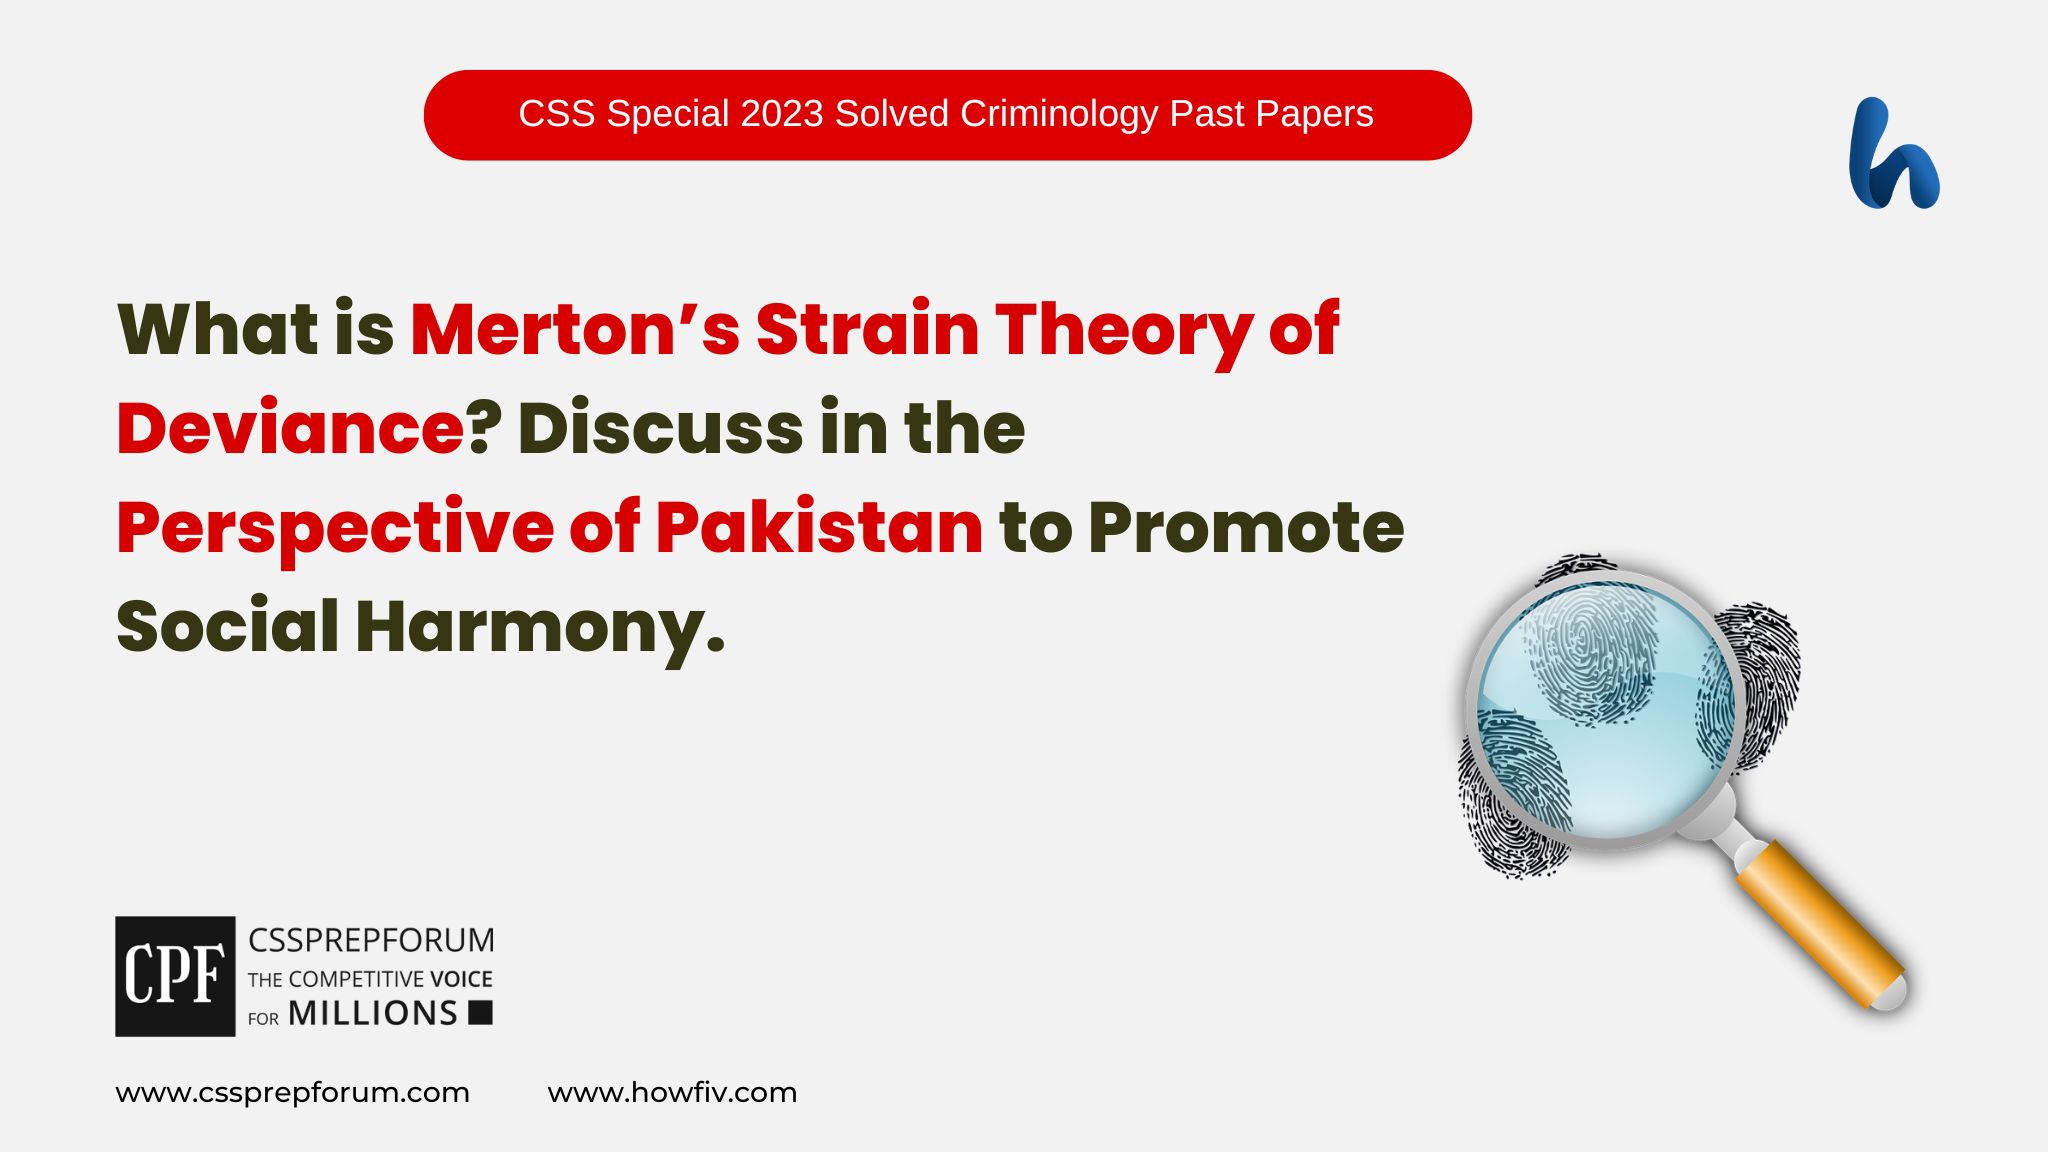 What is Merton’s Strain Theory of Deviance Discuss in the Perspective of Pakistan to Promote Social Harmony.